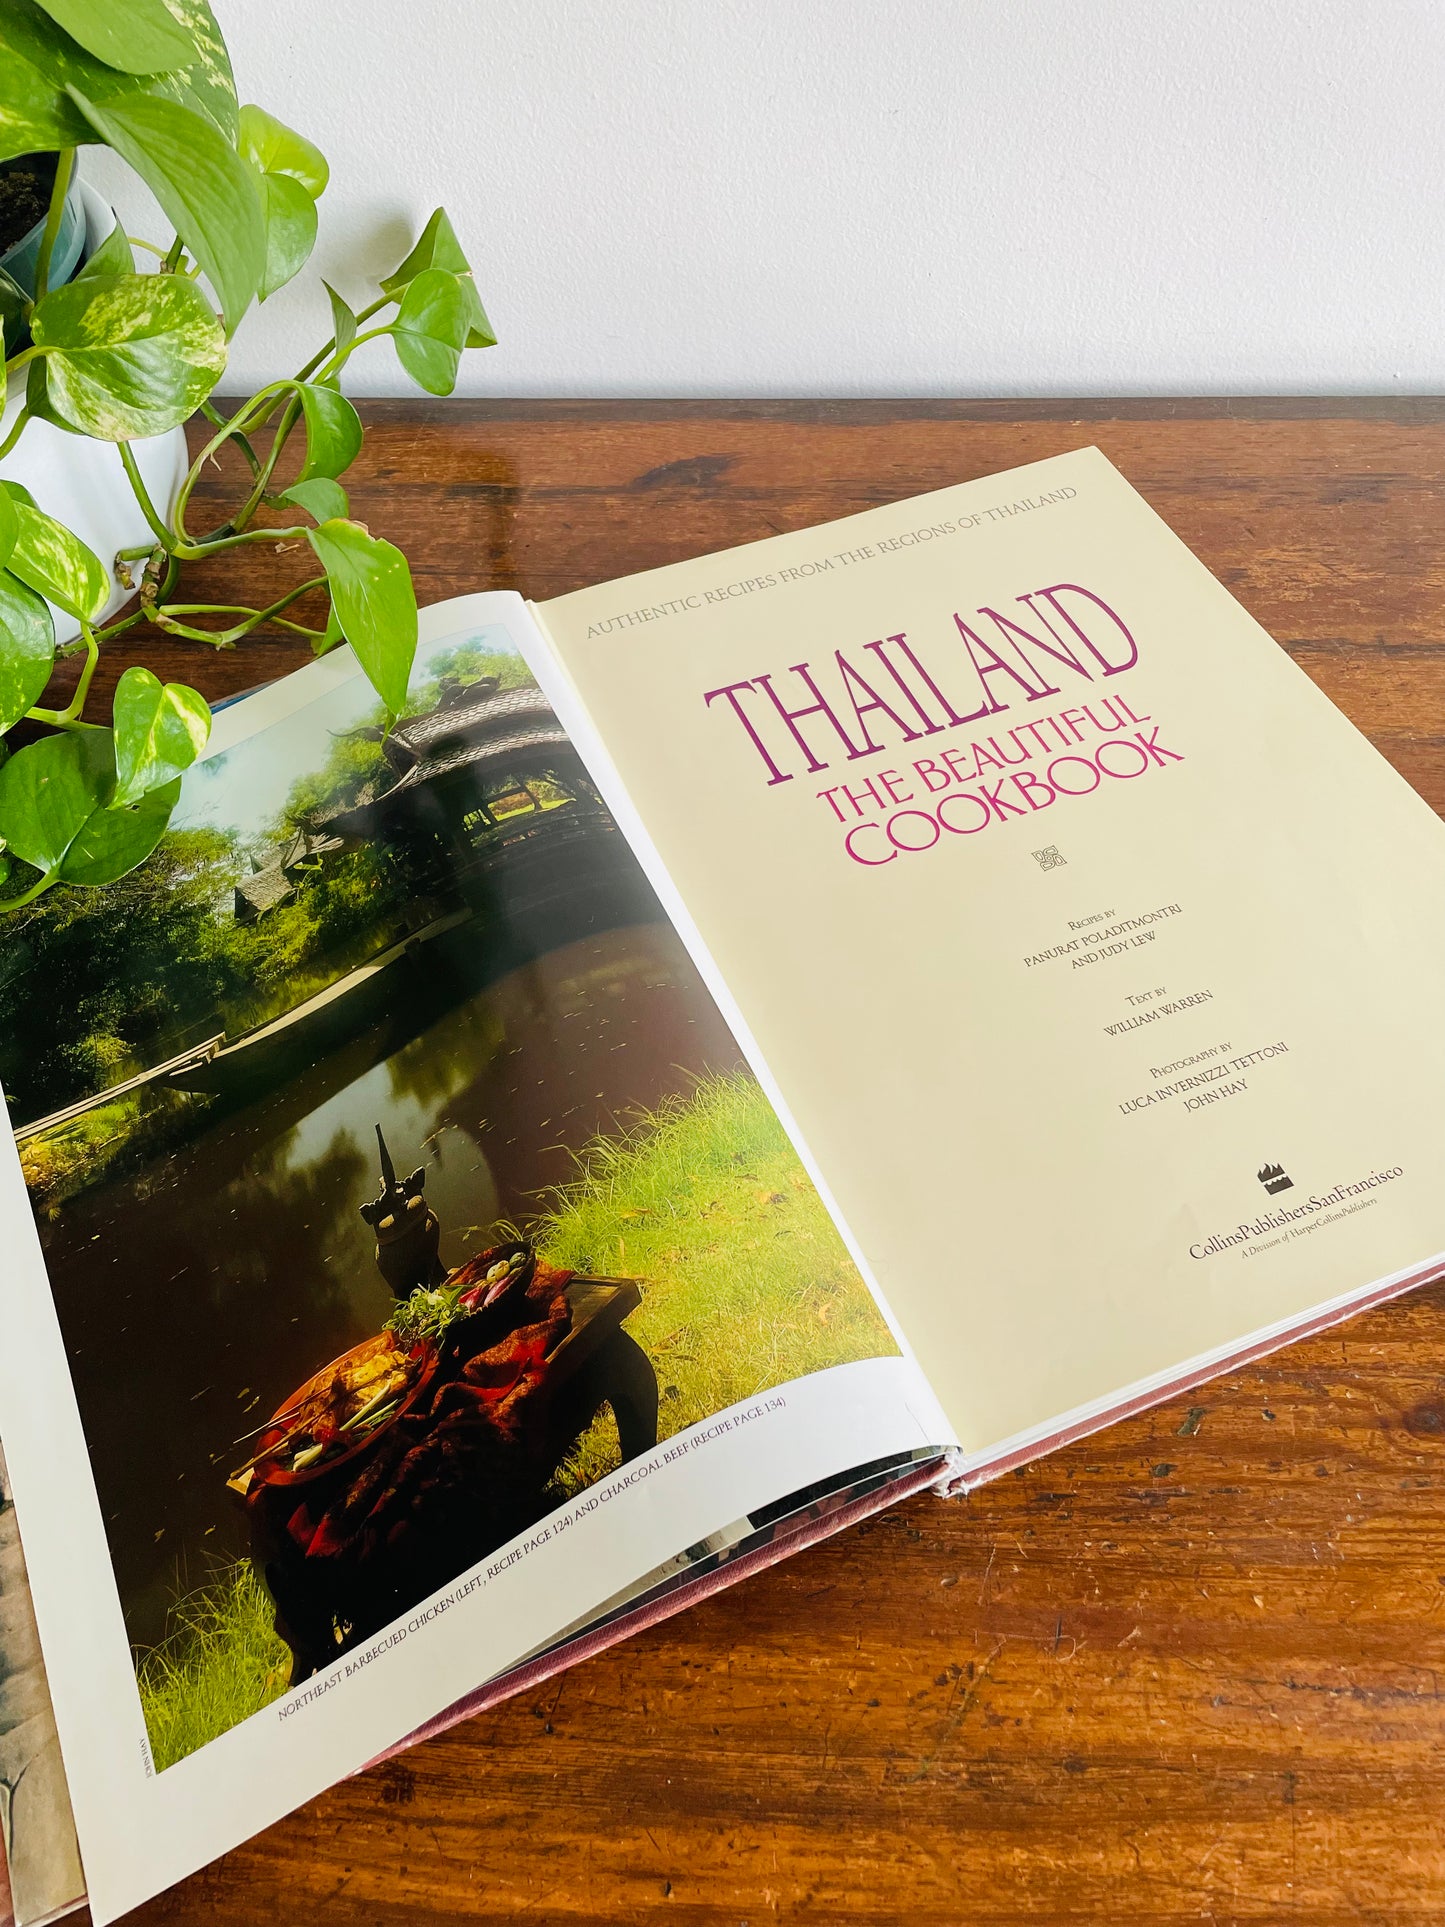 Thailand: The Beautiful Cookbook - Giant Hardcover Book with Photos (1992)